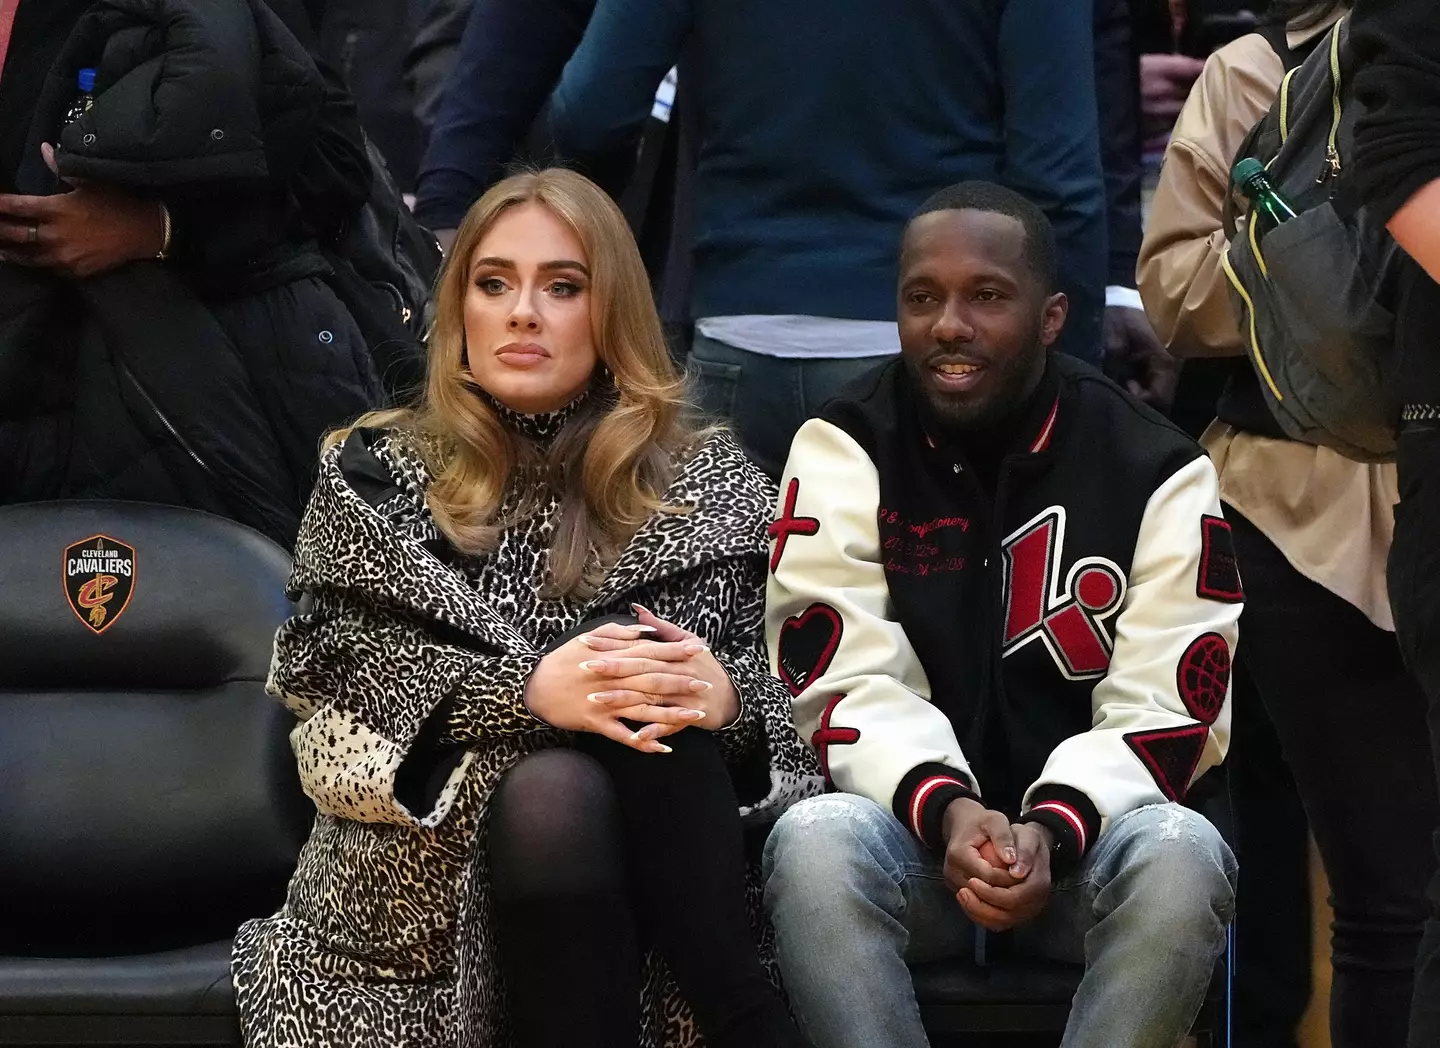 Adele's NBA game face quickly transformed into a meme.